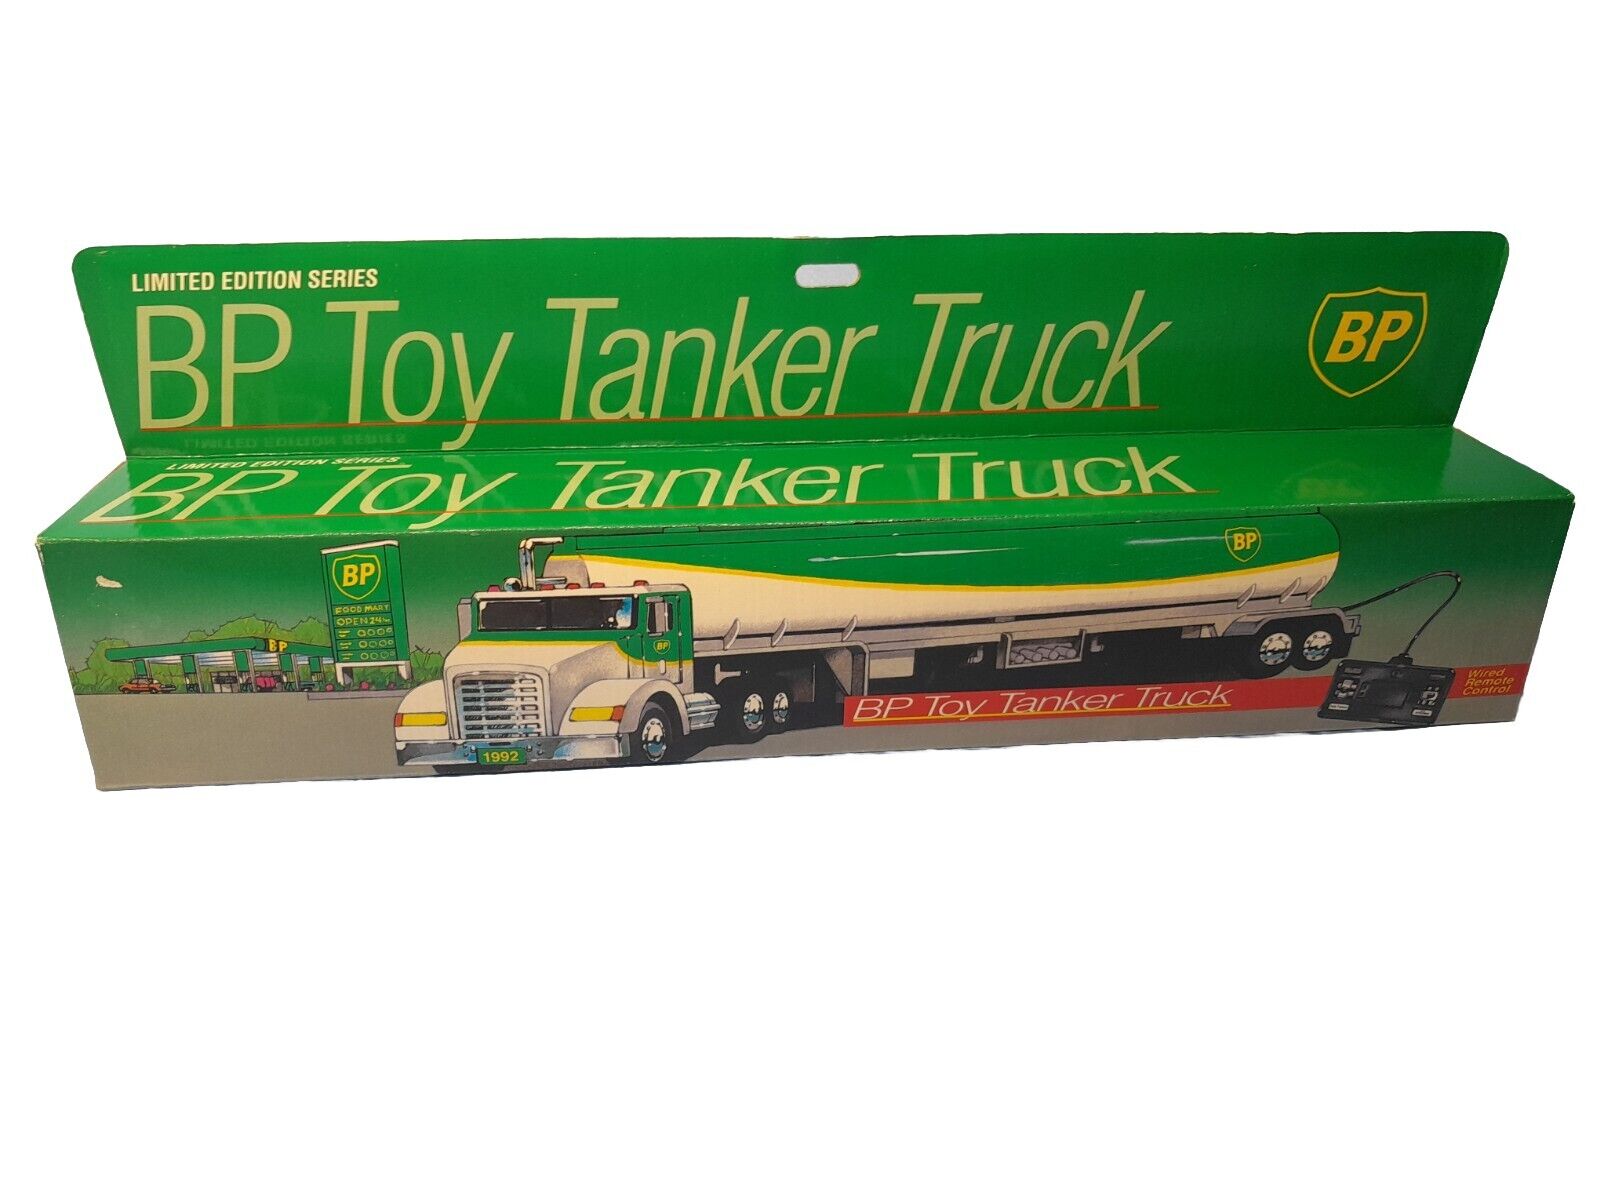 VINTAGE BP Toy Tanker Truck Limited Edition Series w/ Wired Remote Control 1992